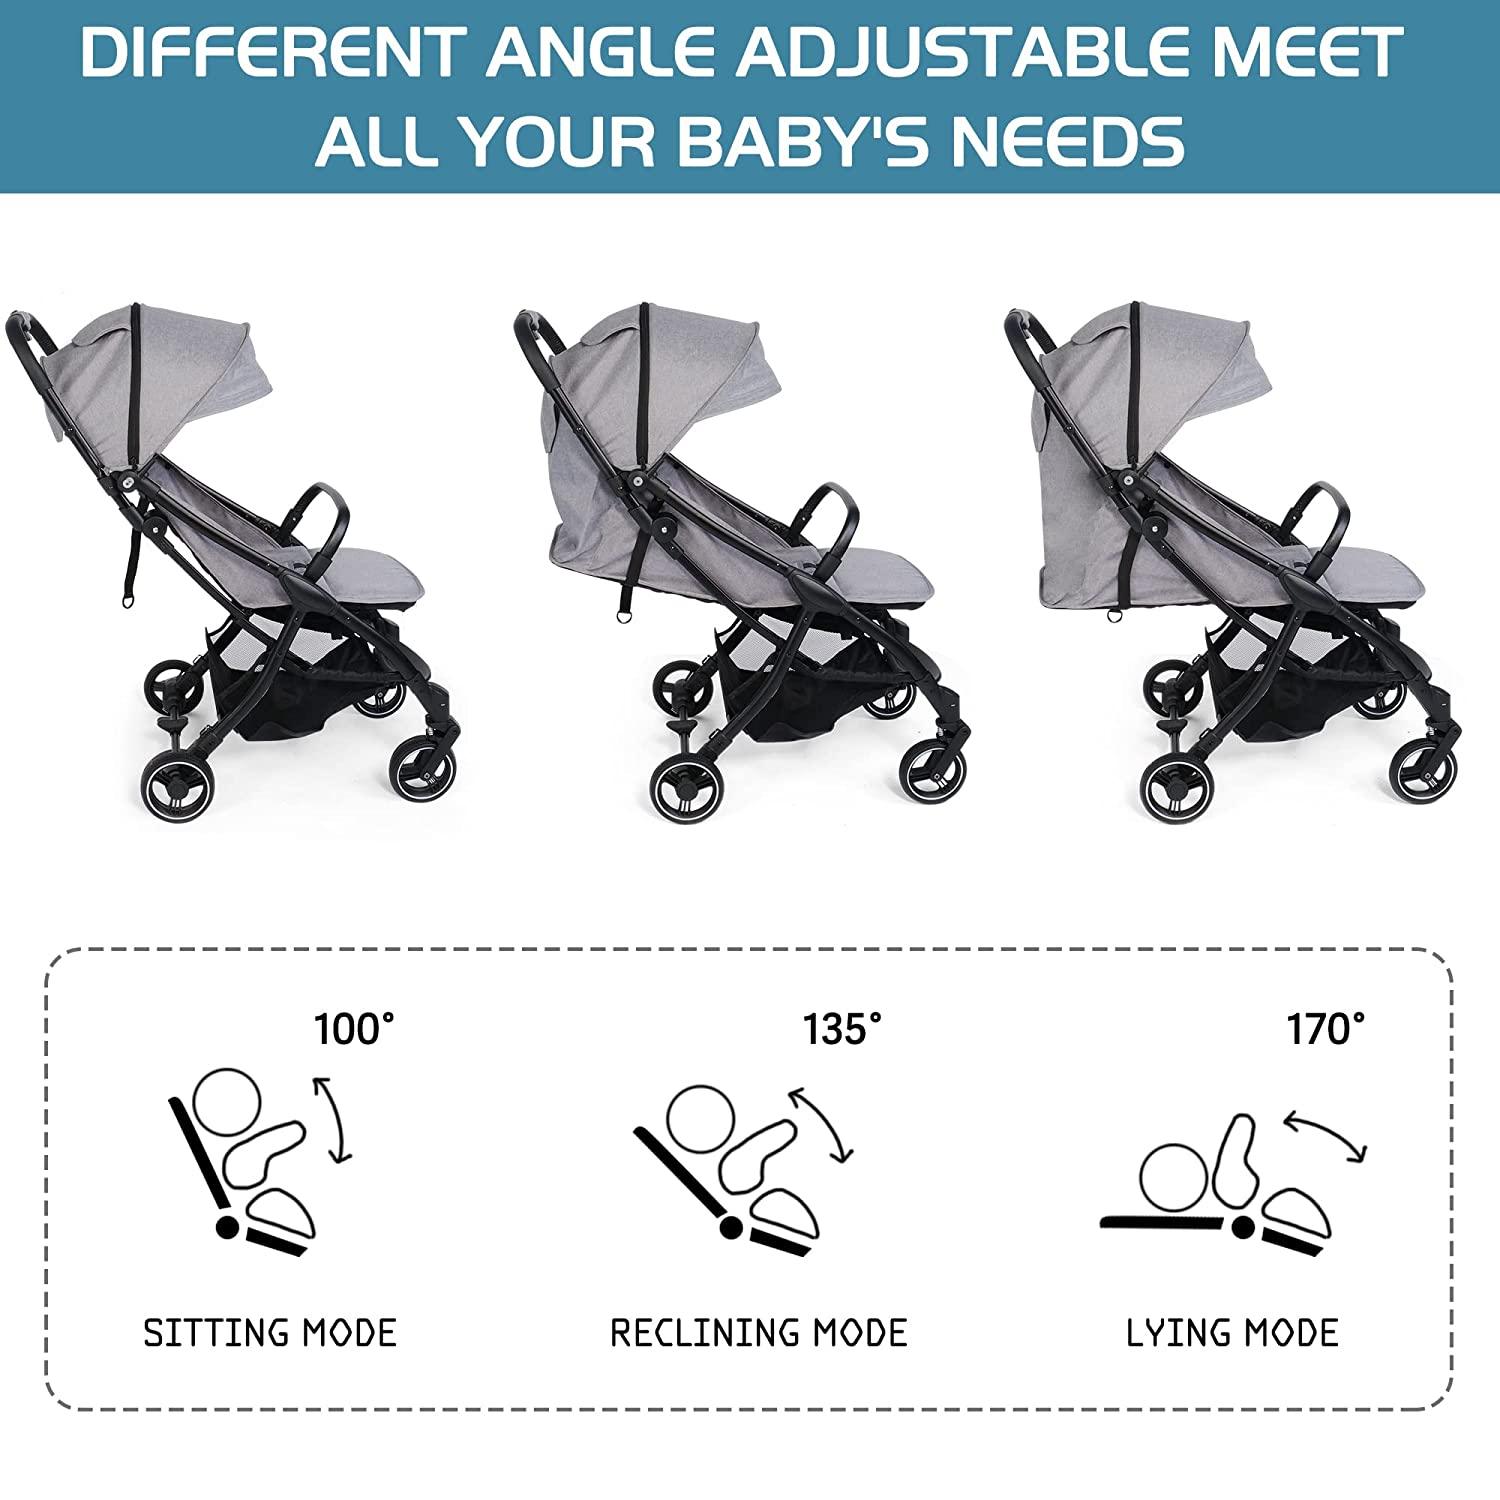 Baby Stroller All-Terrain Lightweight Foldable Compact Pushchair for Outdoor Travel - with Adjustable Canopy, Reclining Seat, Grey - Bosonshop